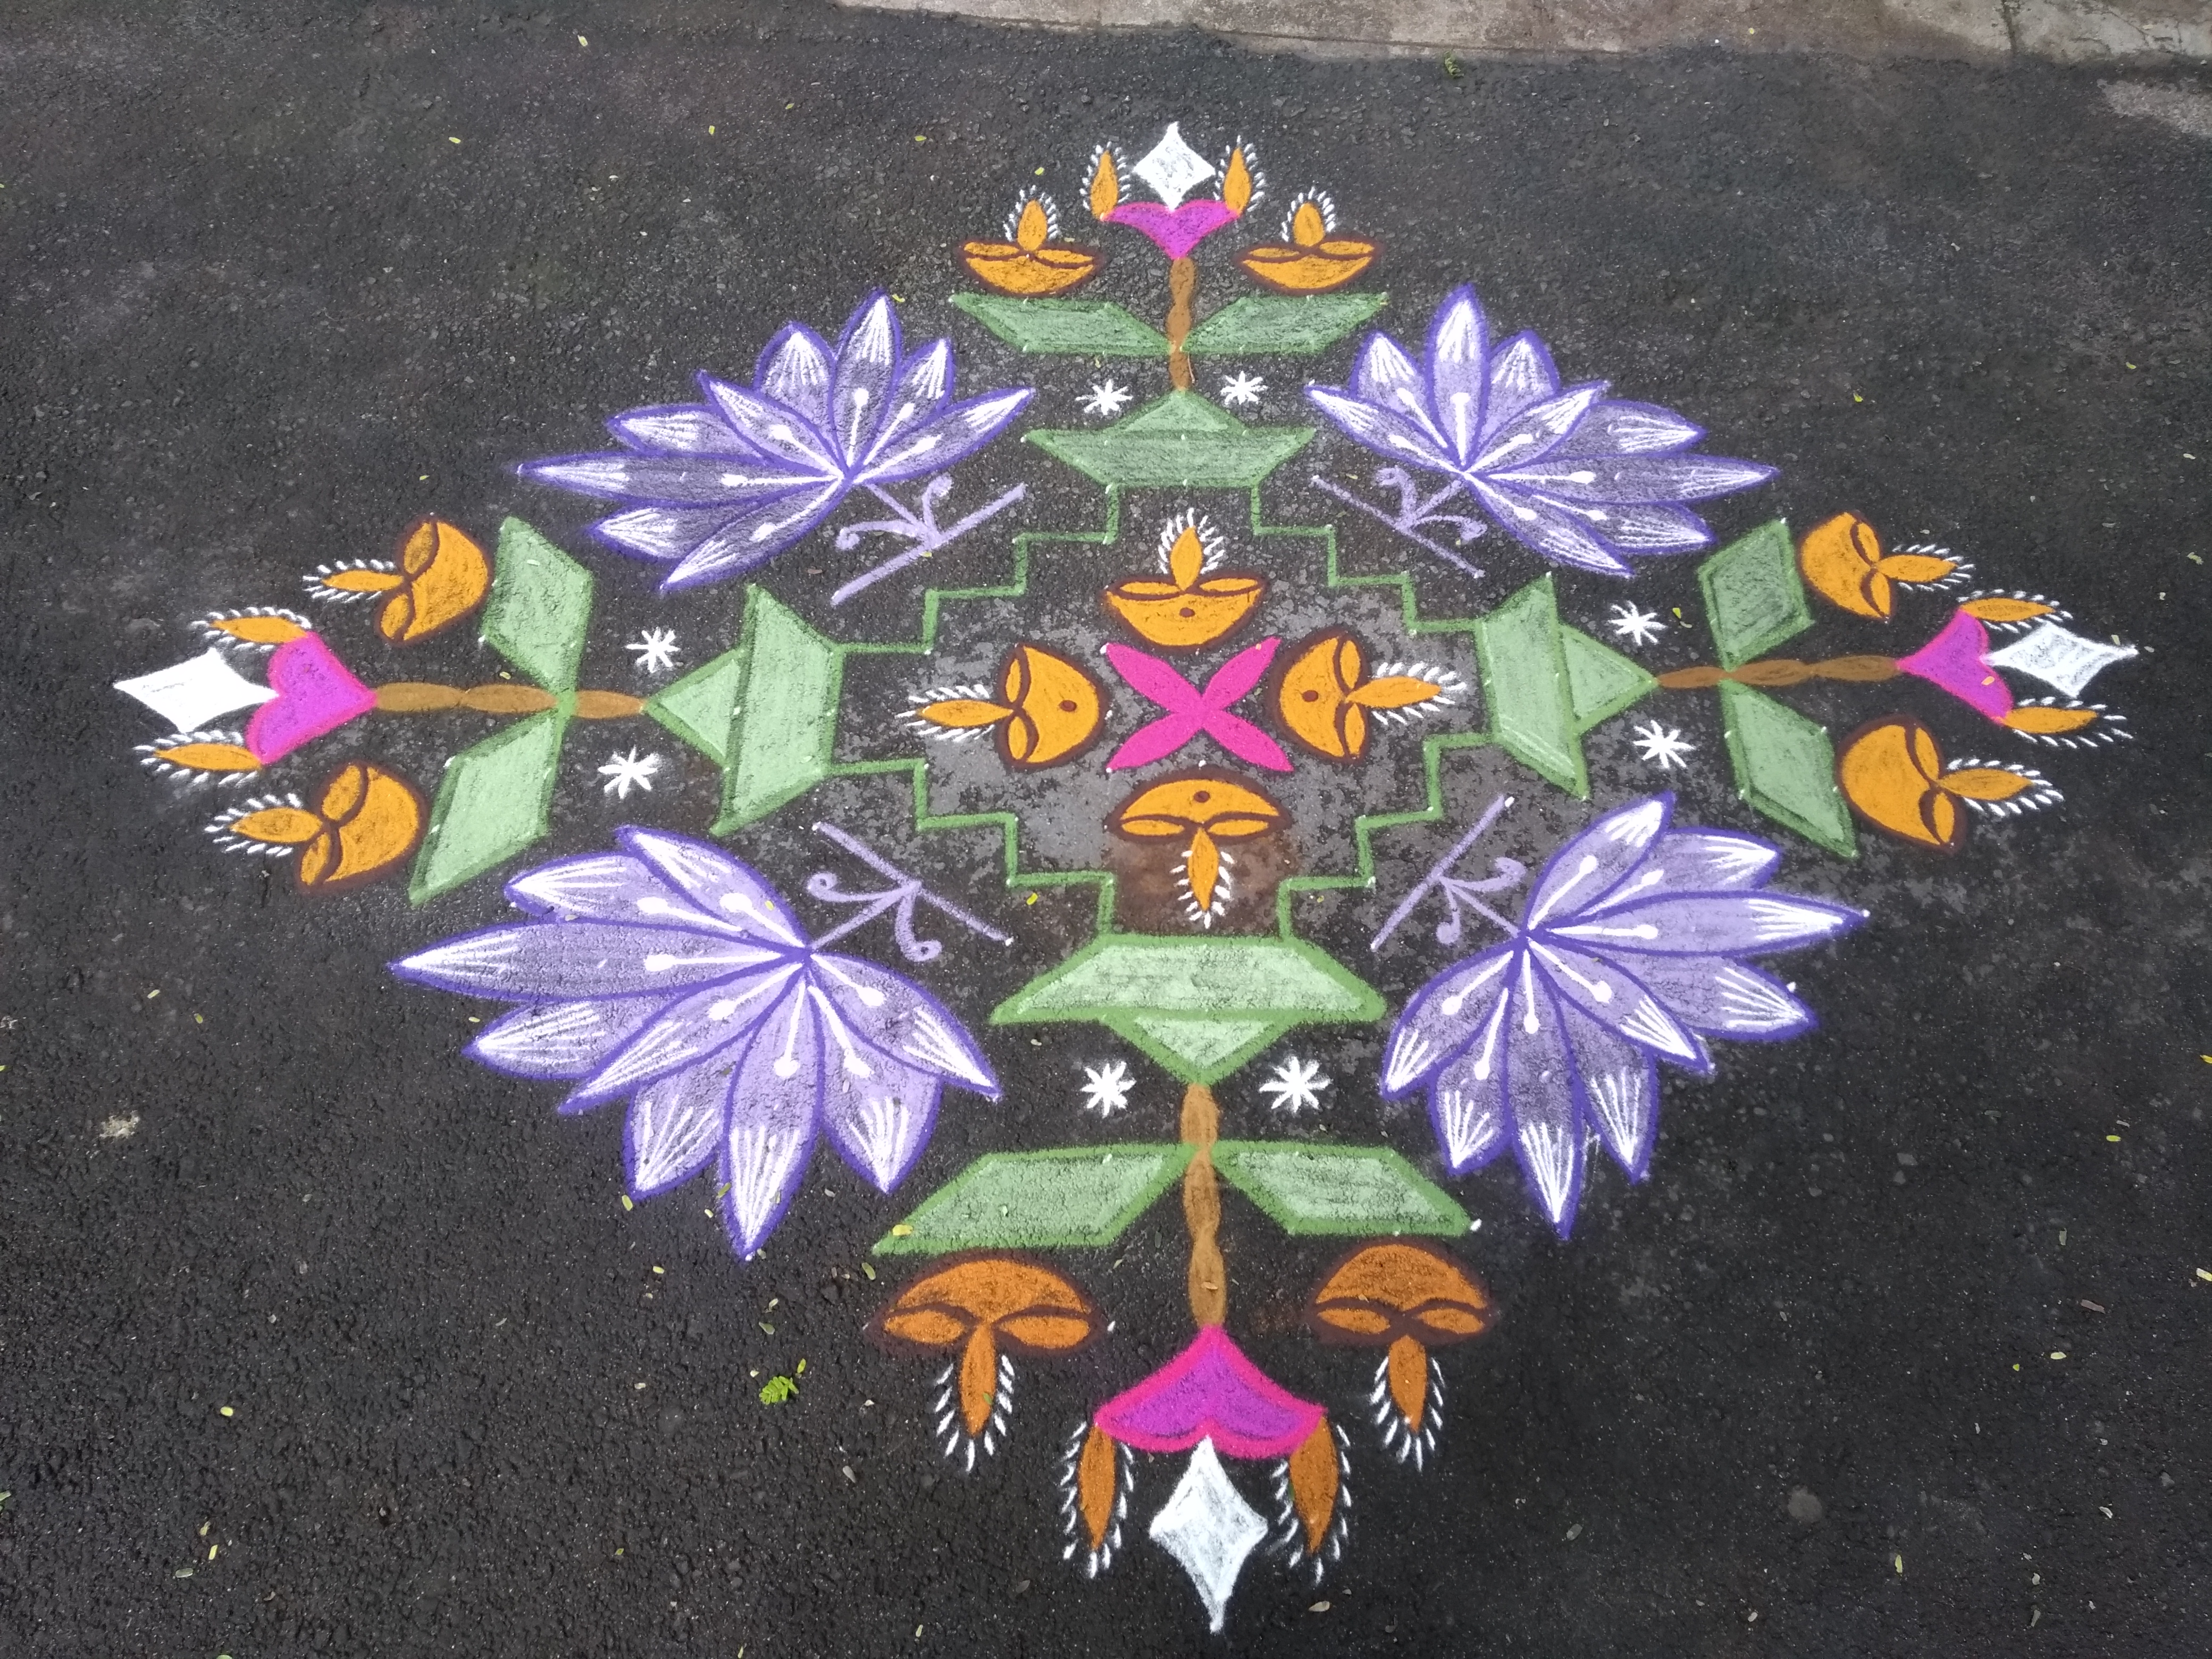 Lotuses and lamps || 25 dots contest Kolam